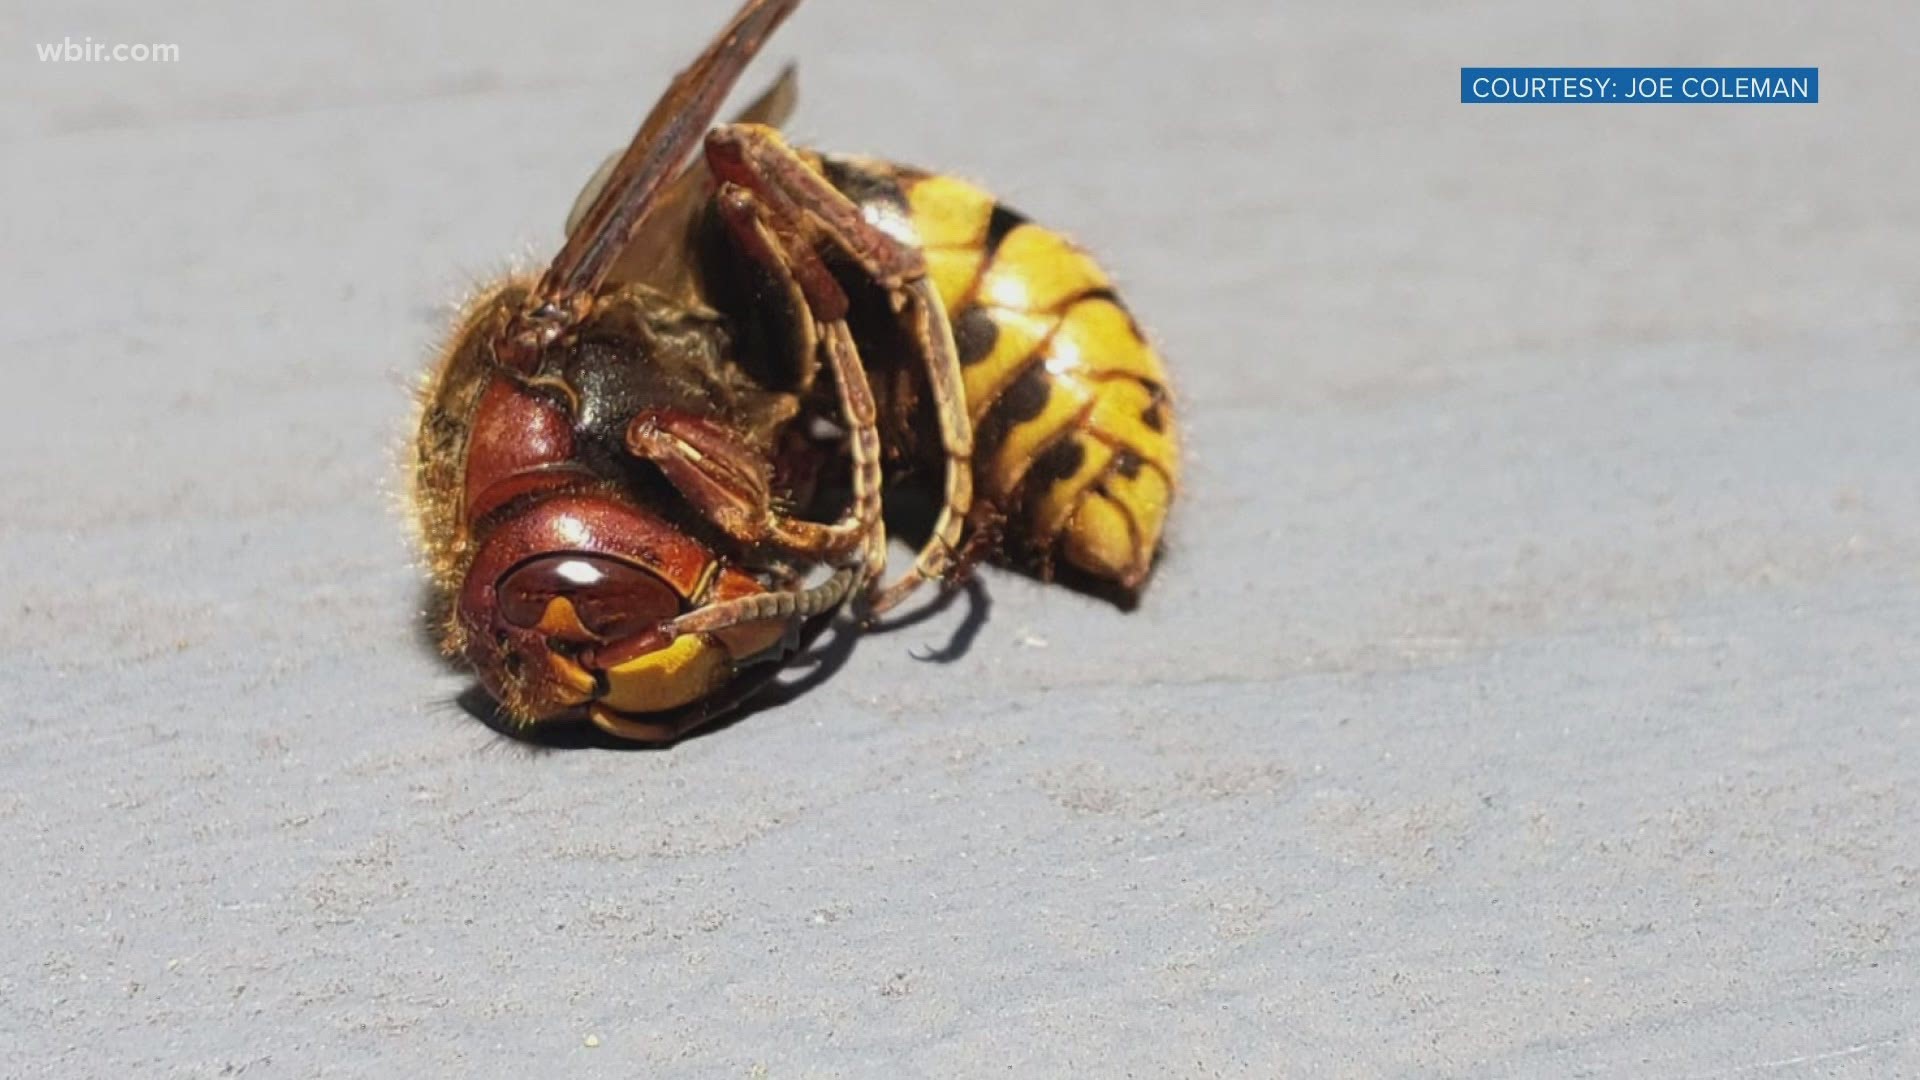 European hornets look similar, but have 'raindrop' spots along their bands.